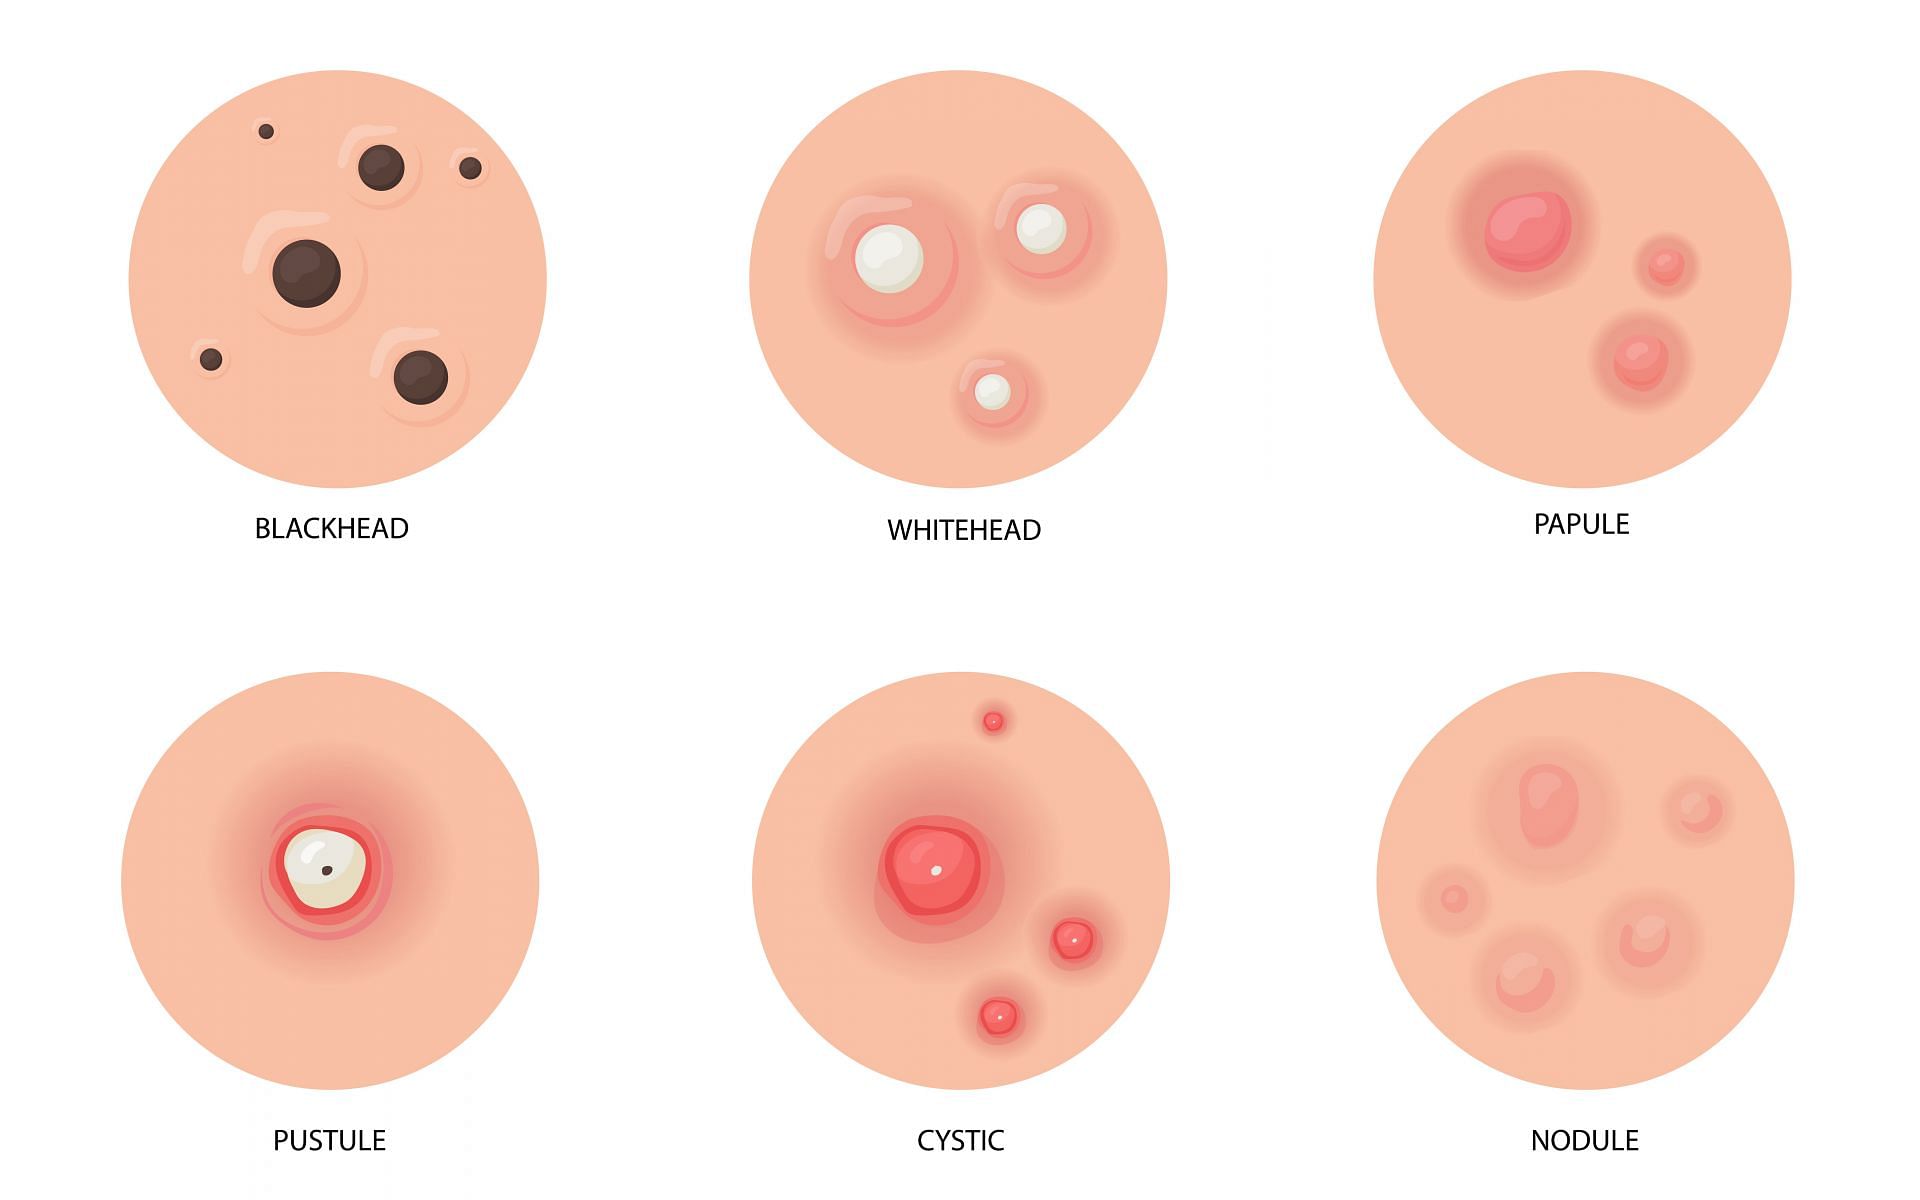 Main difference between blackheads and whiteheads (Image by pch.vector on Freepik)